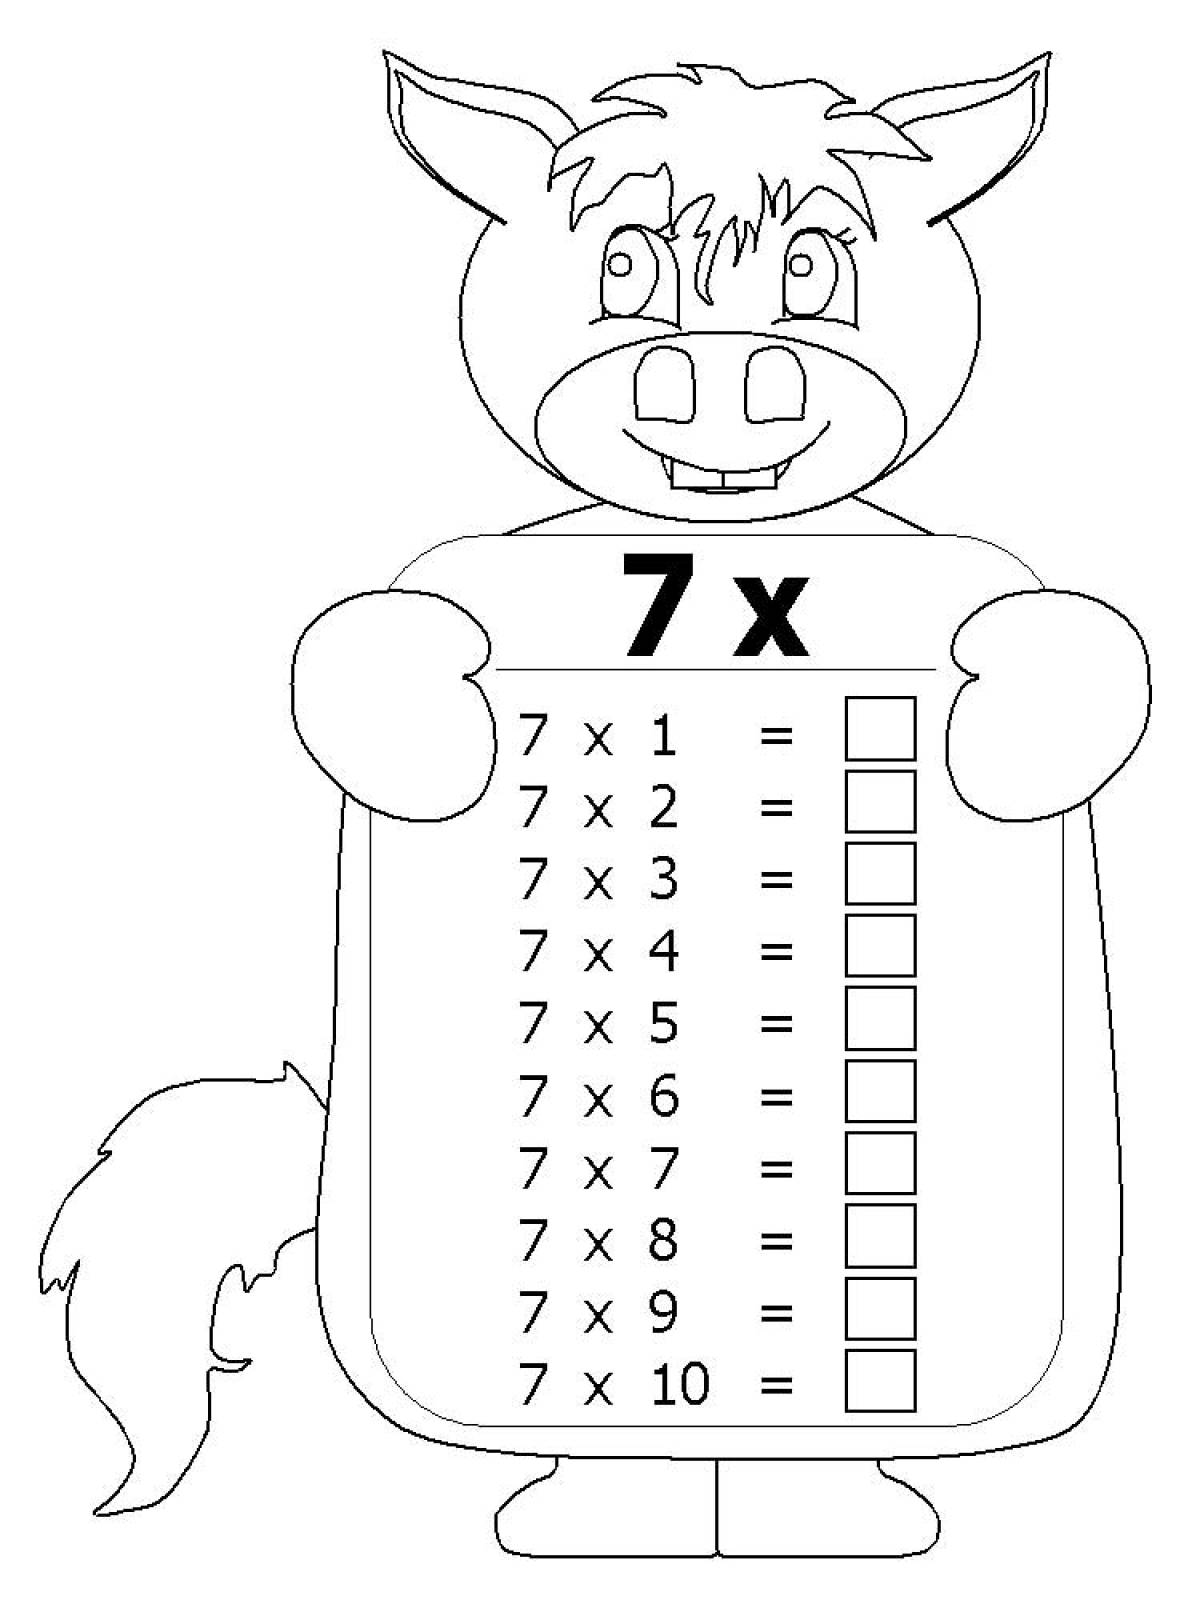 With examples for multiplication 11